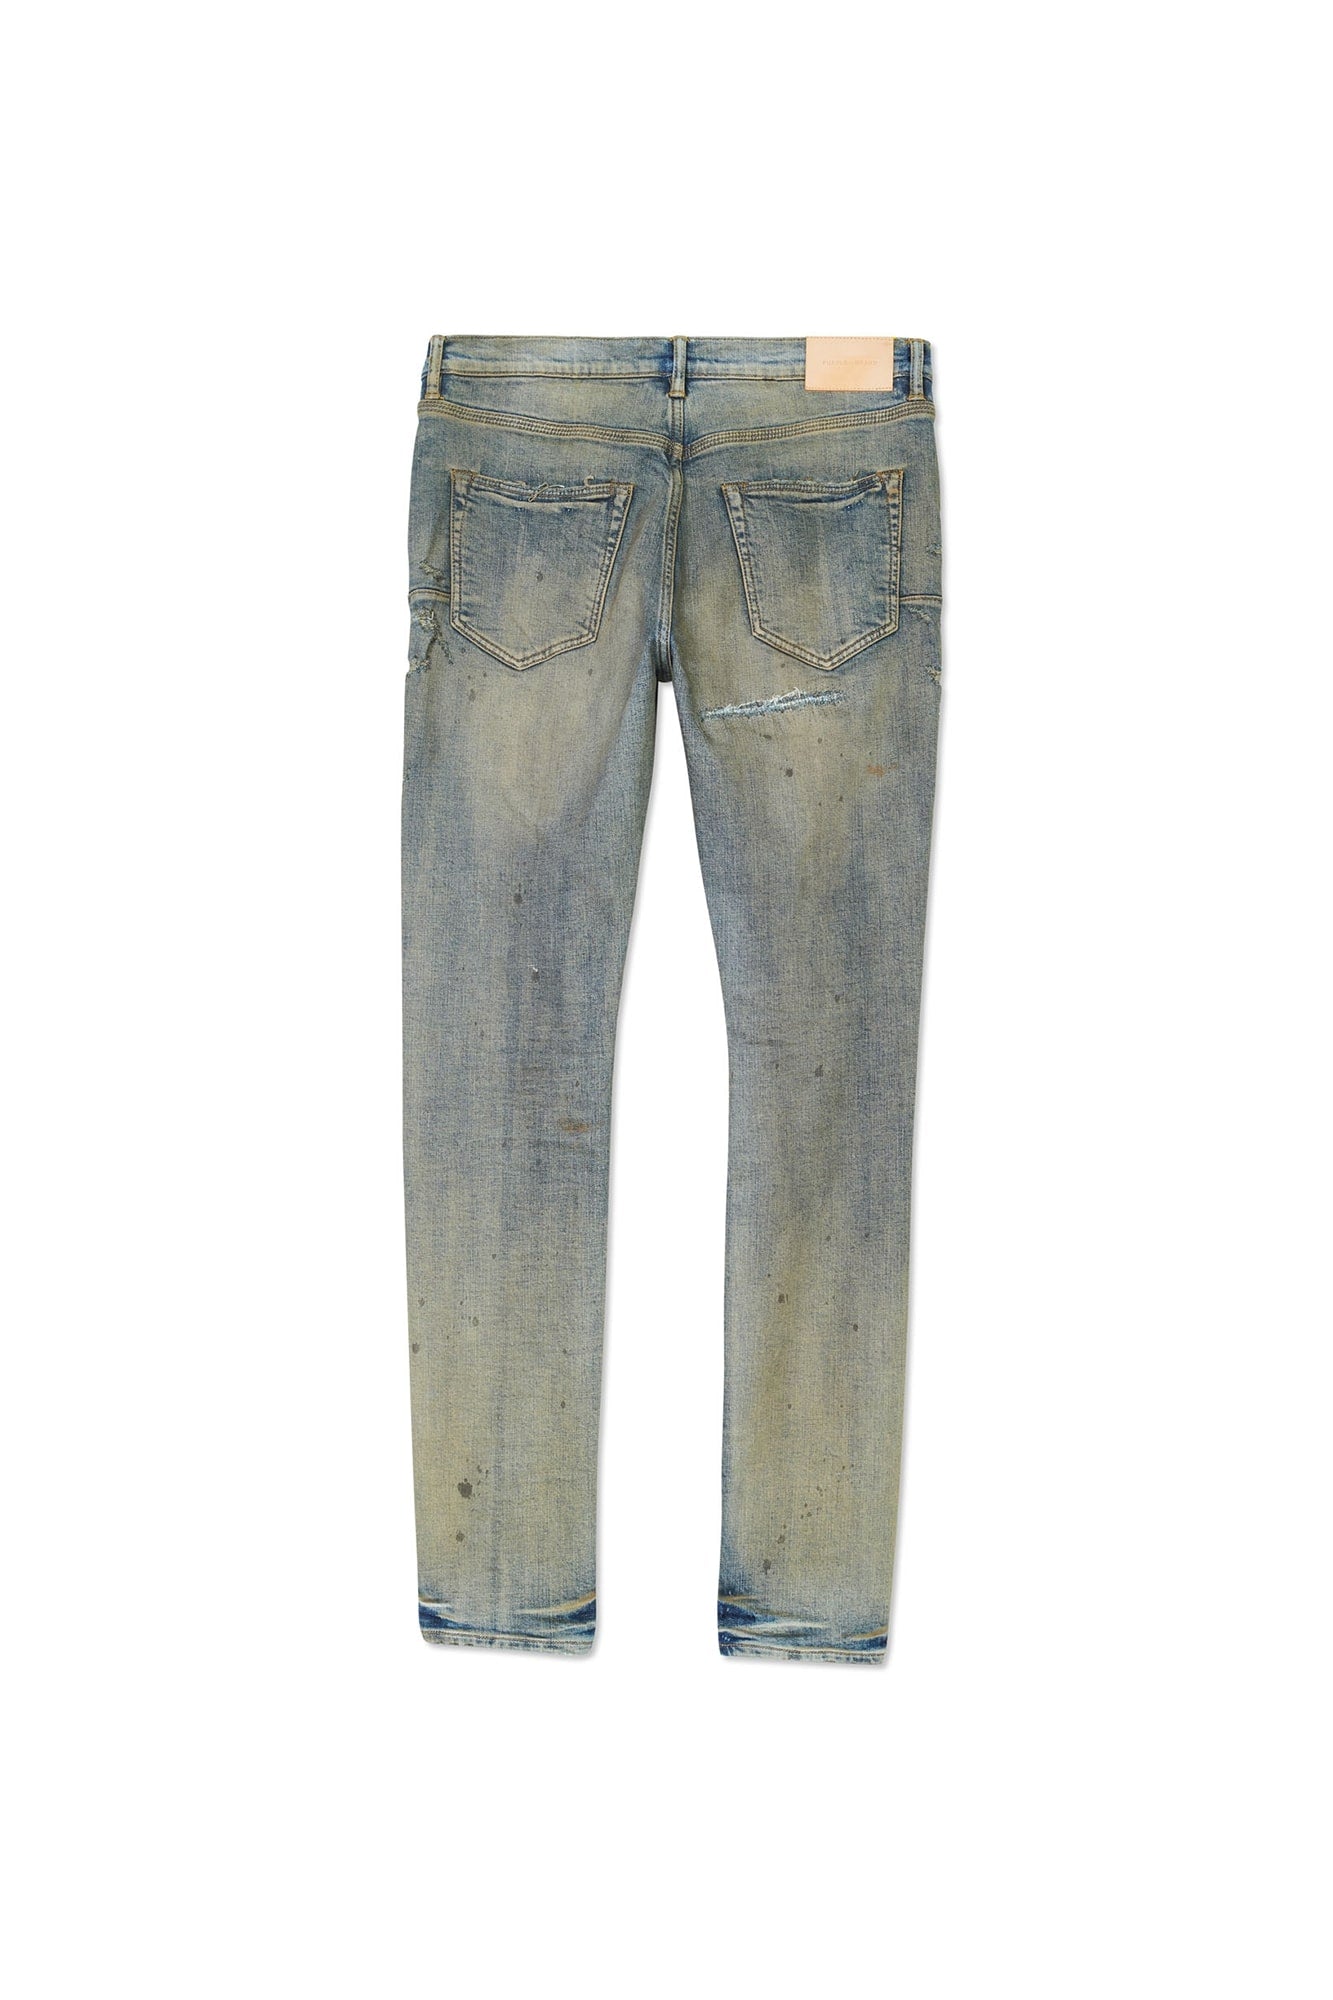 PURPLE BRAND - Men's Denim Jean - Low Rise Skinny - Style No. P001 - Exclusive Indigo Oil Patched - Back